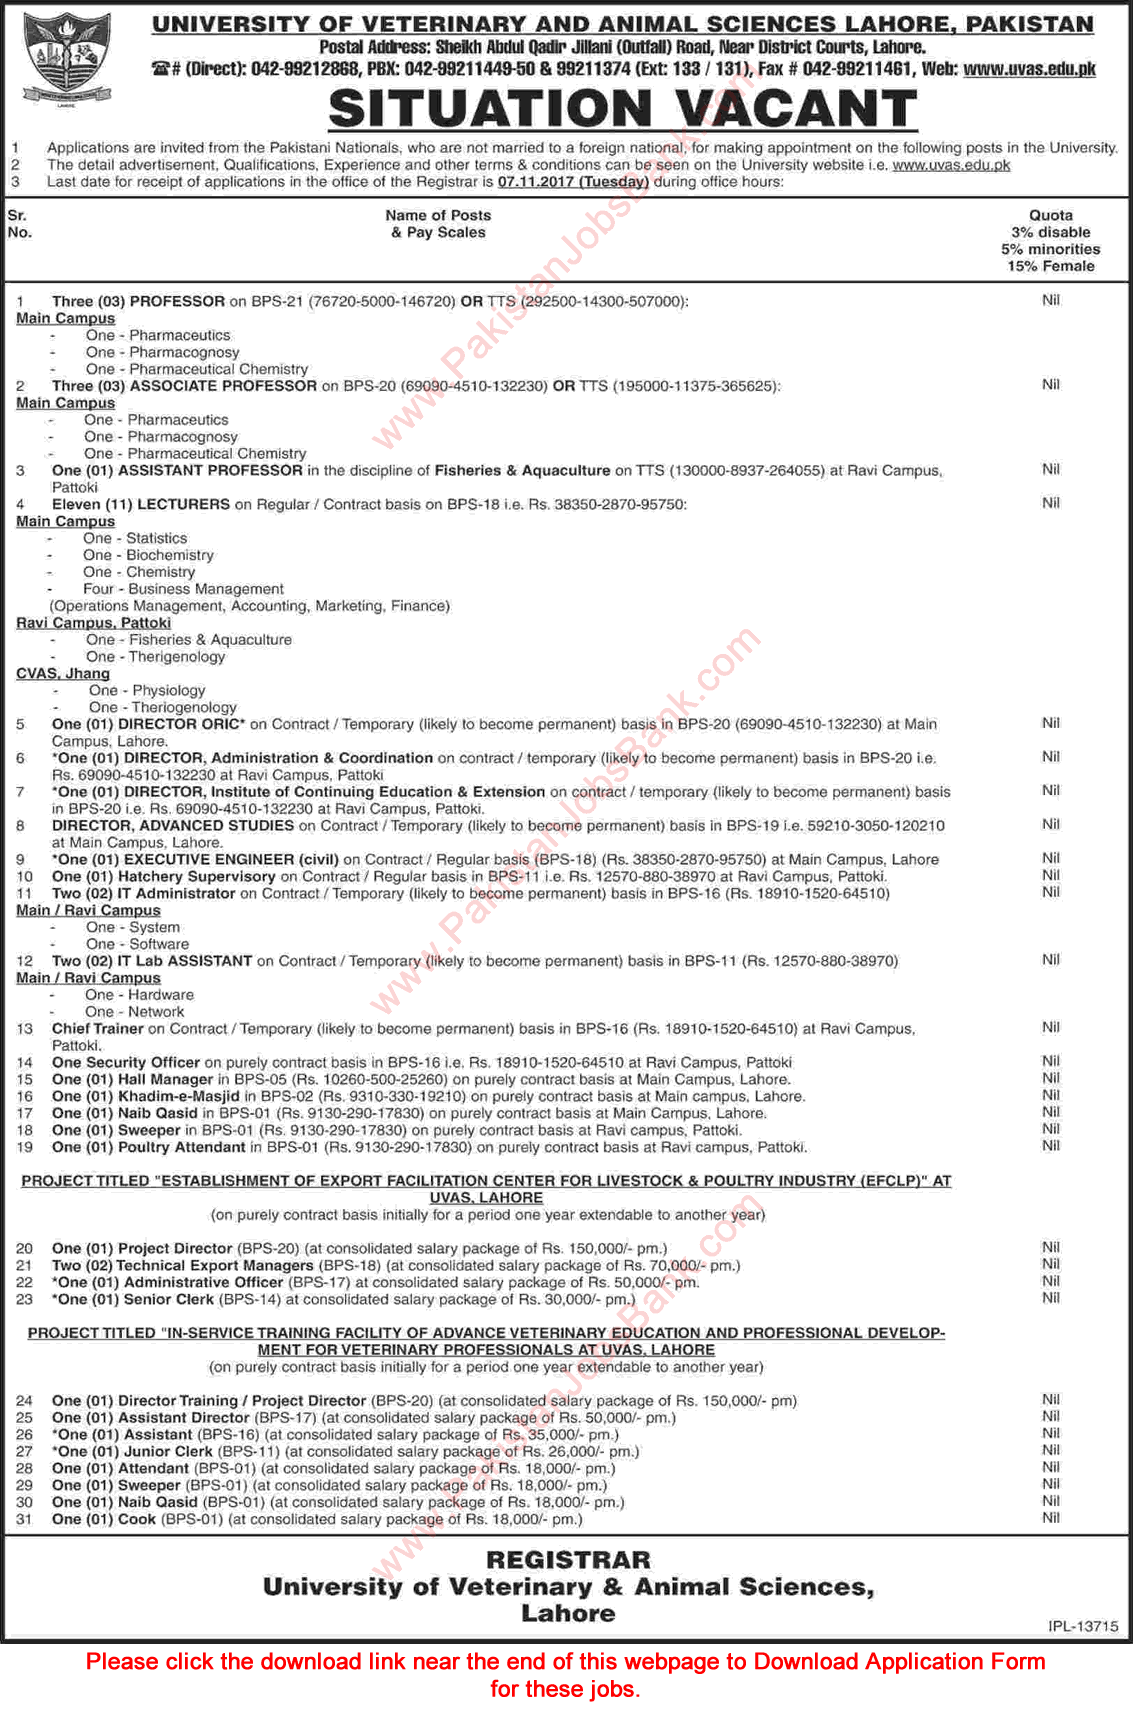 University of Veterinary and Animal Sciences Lahore Jobs October 2017 UVAS Application Form Latest